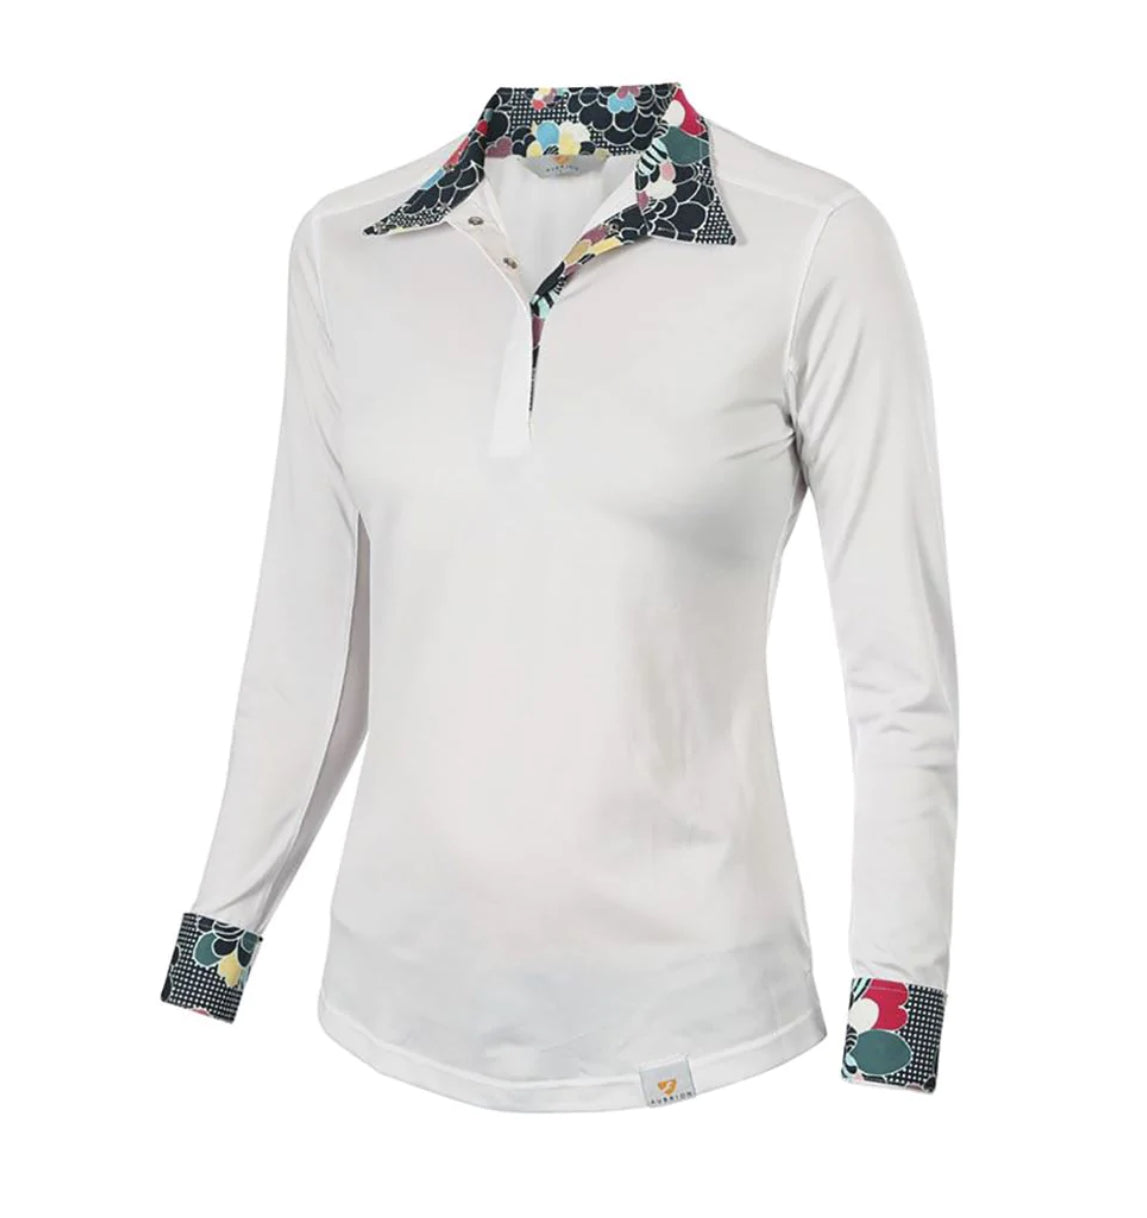 Aubrion Equestrian Ladies Breathable Show Shirt Long Sleeve